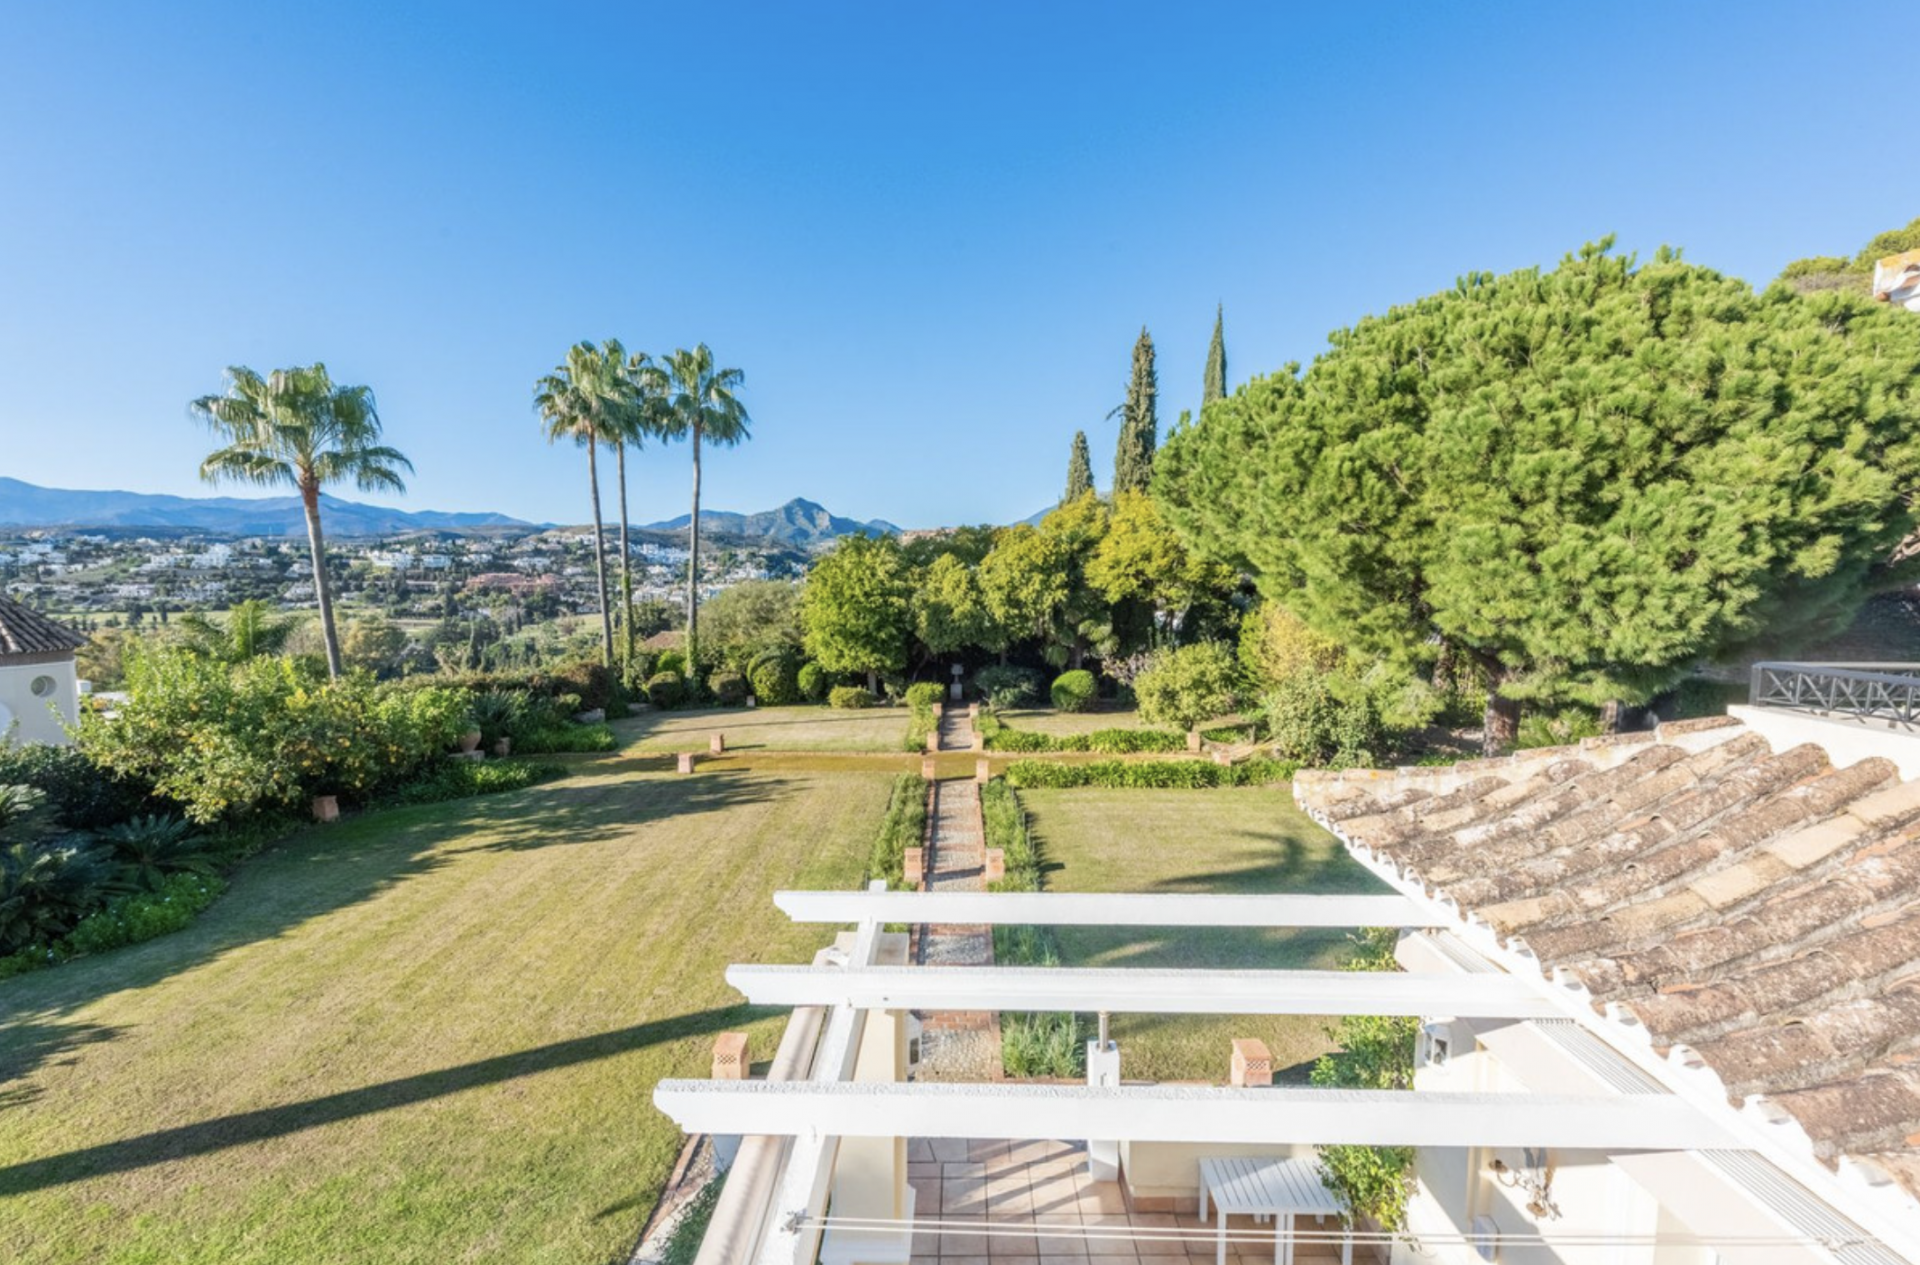 Beautiful Andalusian-style villa with an enchanting garden located in El Paraiso Medio